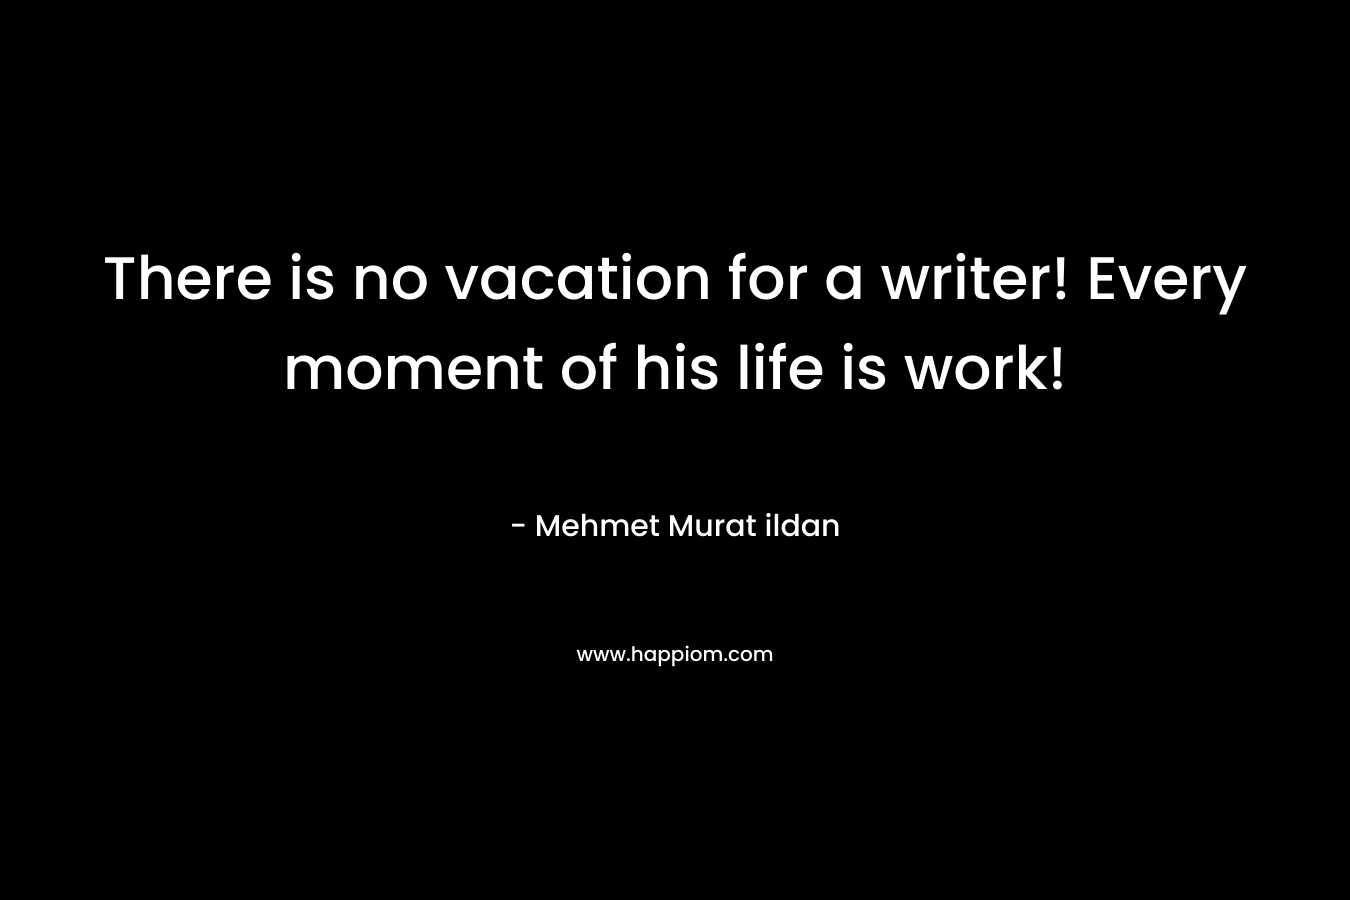 There is no vacation for a writer! Every moment of his life is work!